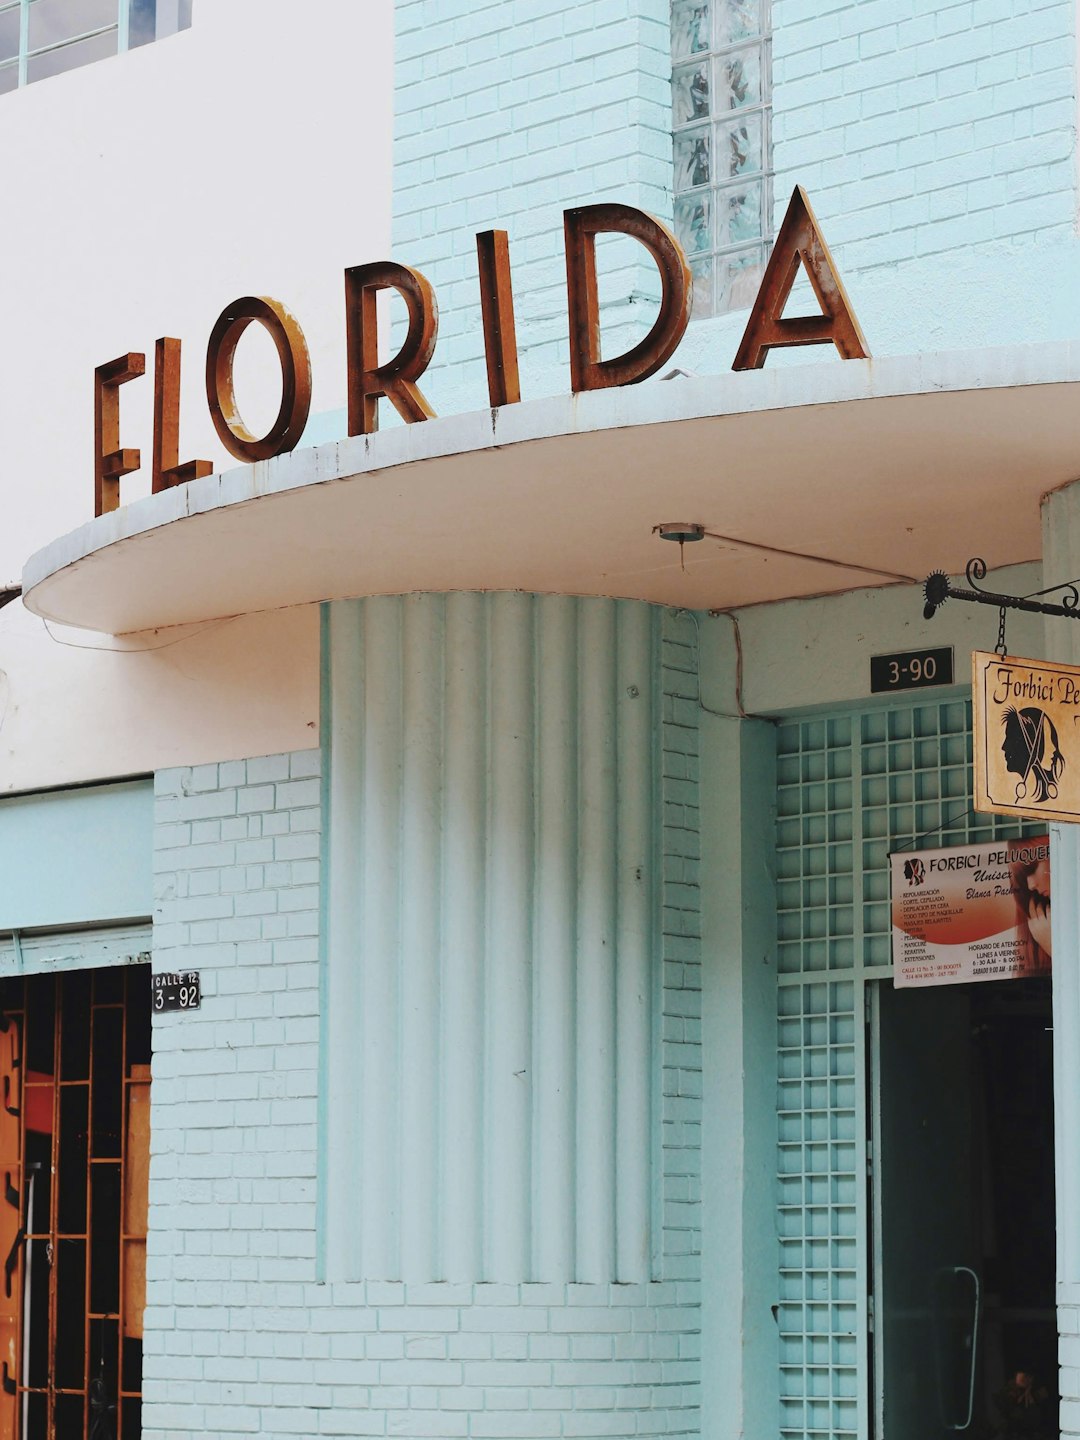 Florida signage on building during day